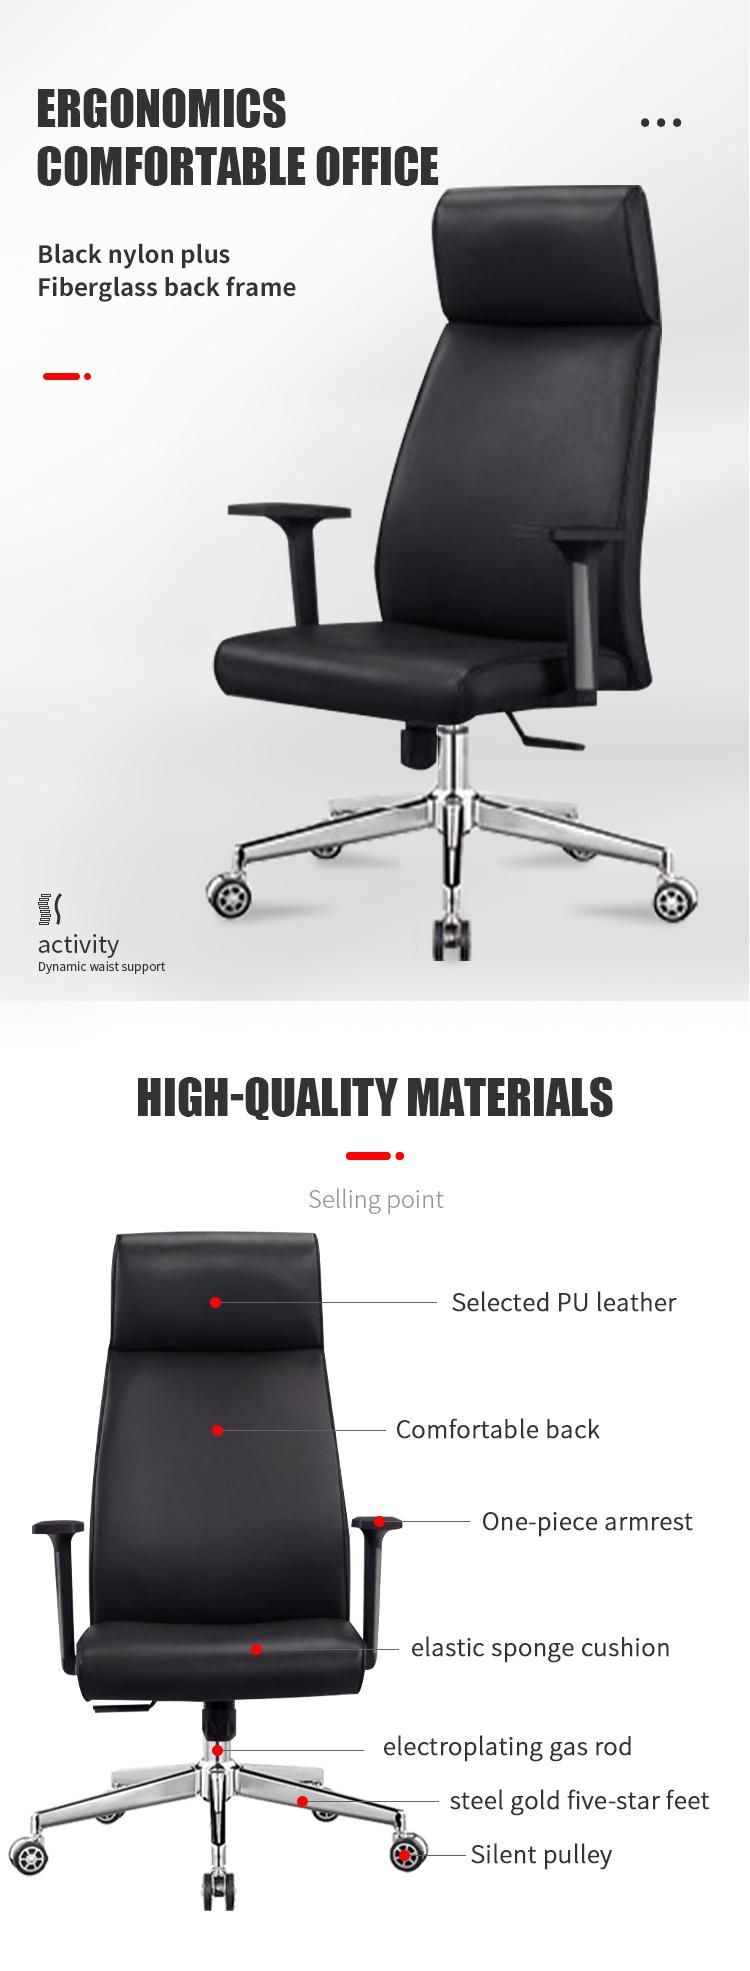 Factory Direct Sale Ergonomic Office Desk Swivel Chairs Executive Leather Office Chair